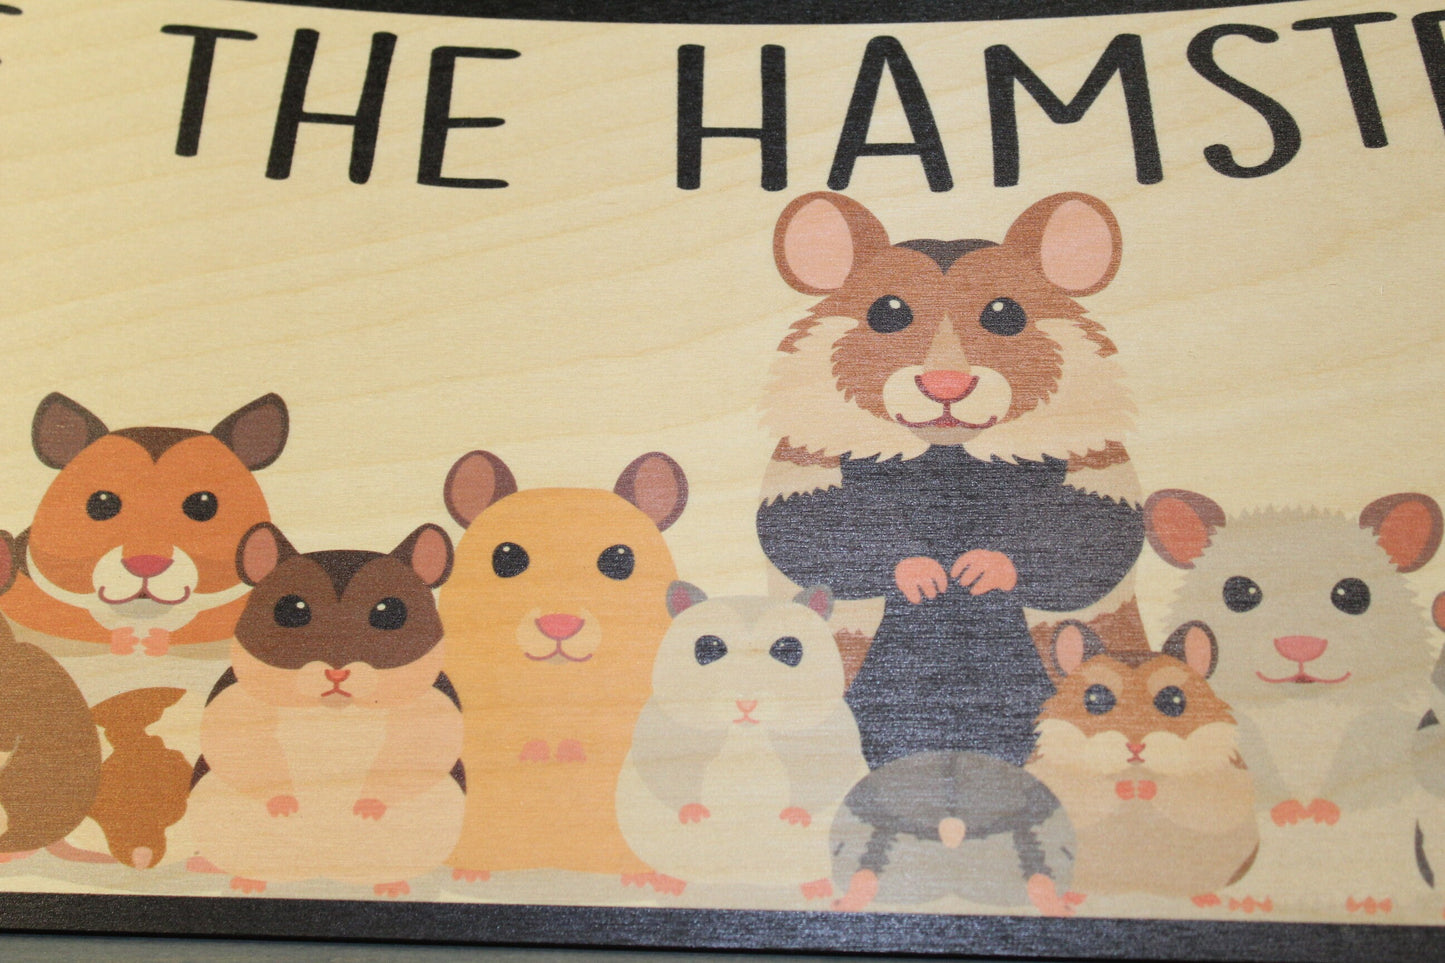 Beware Of The Hamsters Warning Furbaby Pet Animal Lover Small Pets Kids Room Wooden Sign Wall Decor Art Plaque Wood Print